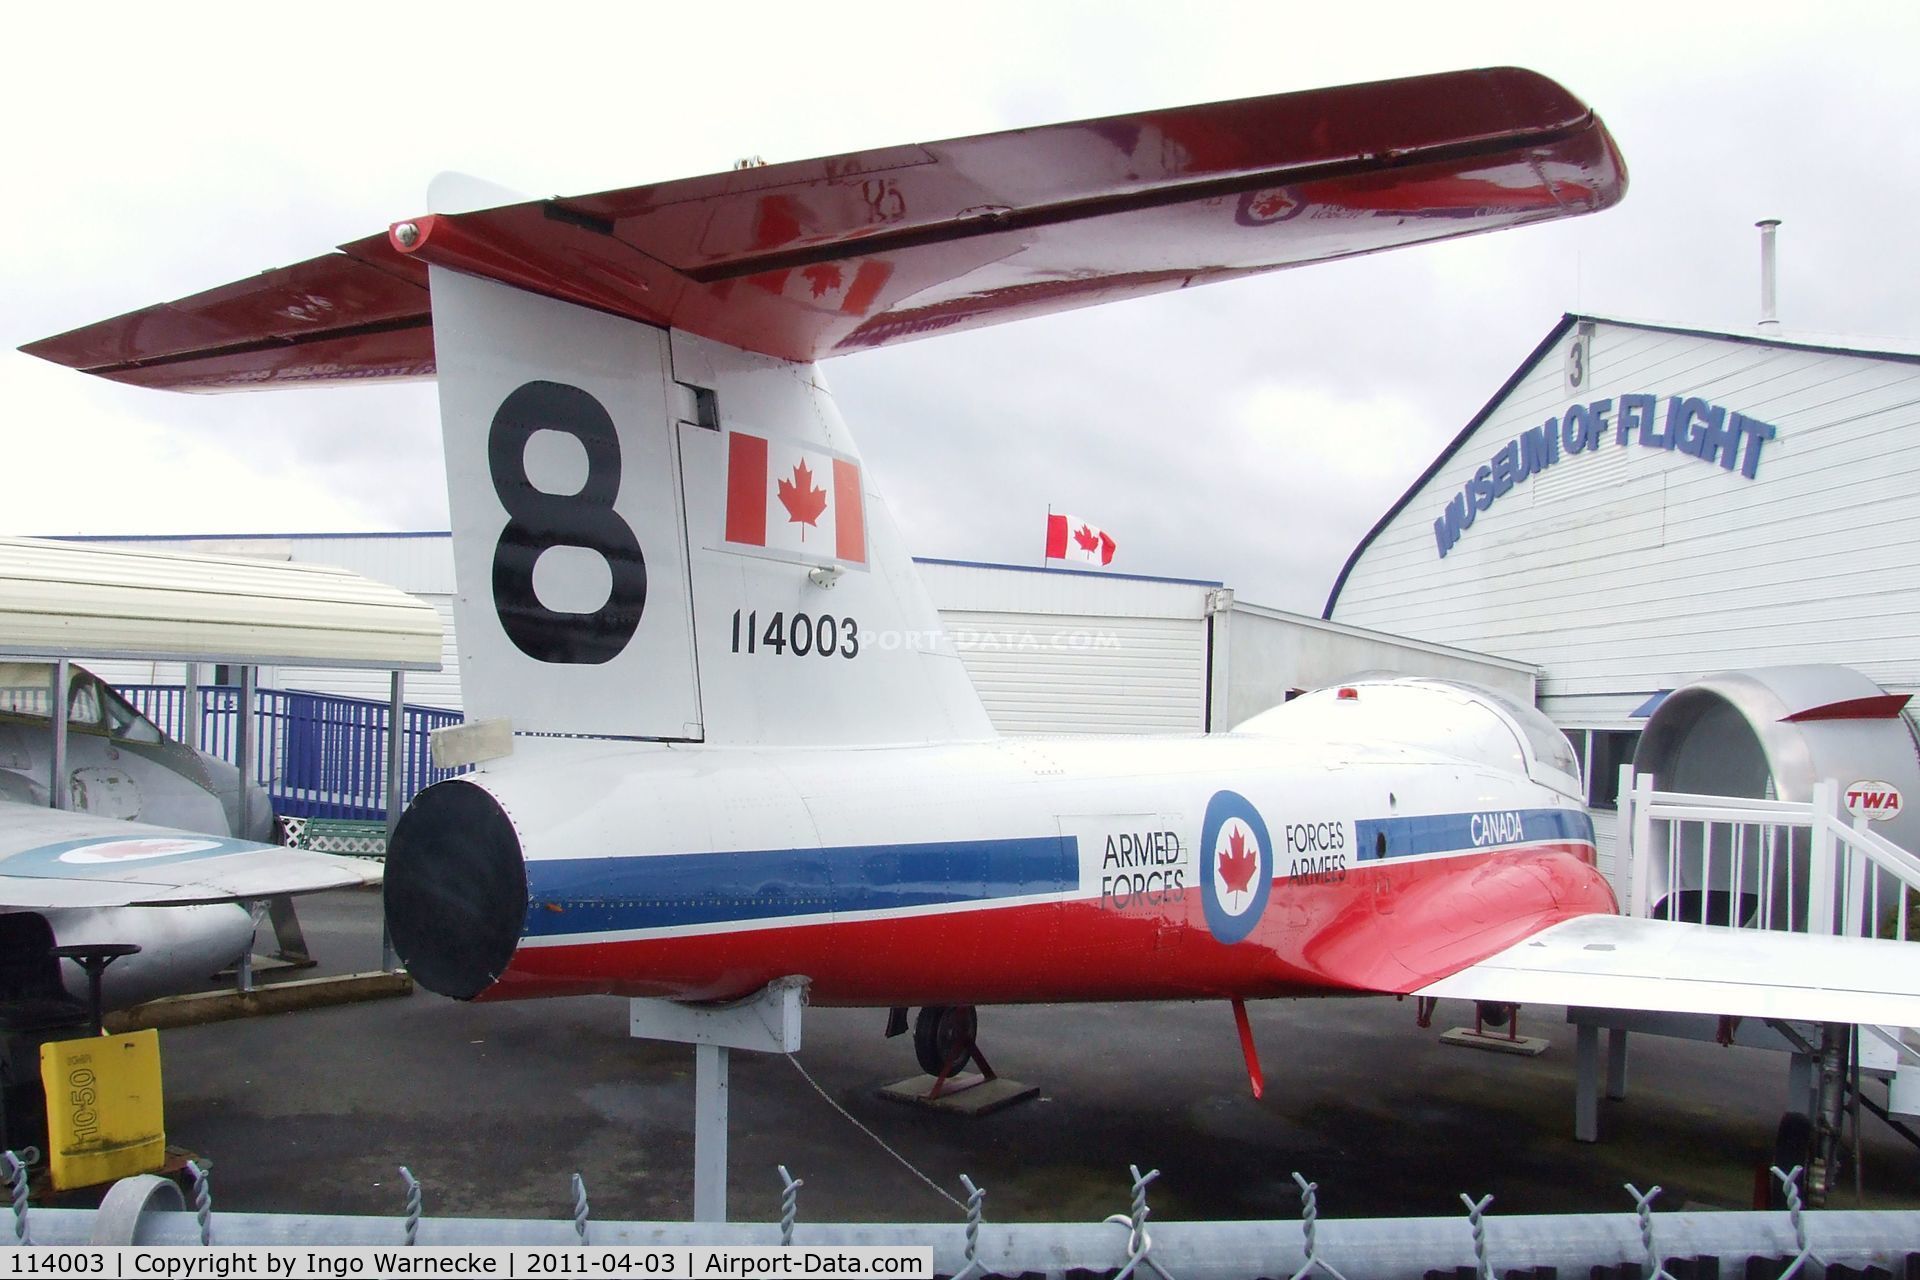 114003, 1970 Canadair CT-114 Tutor C/N 1003, Canadair CT-114 Tutor at the Canadian Museum of Flight, Langley BC